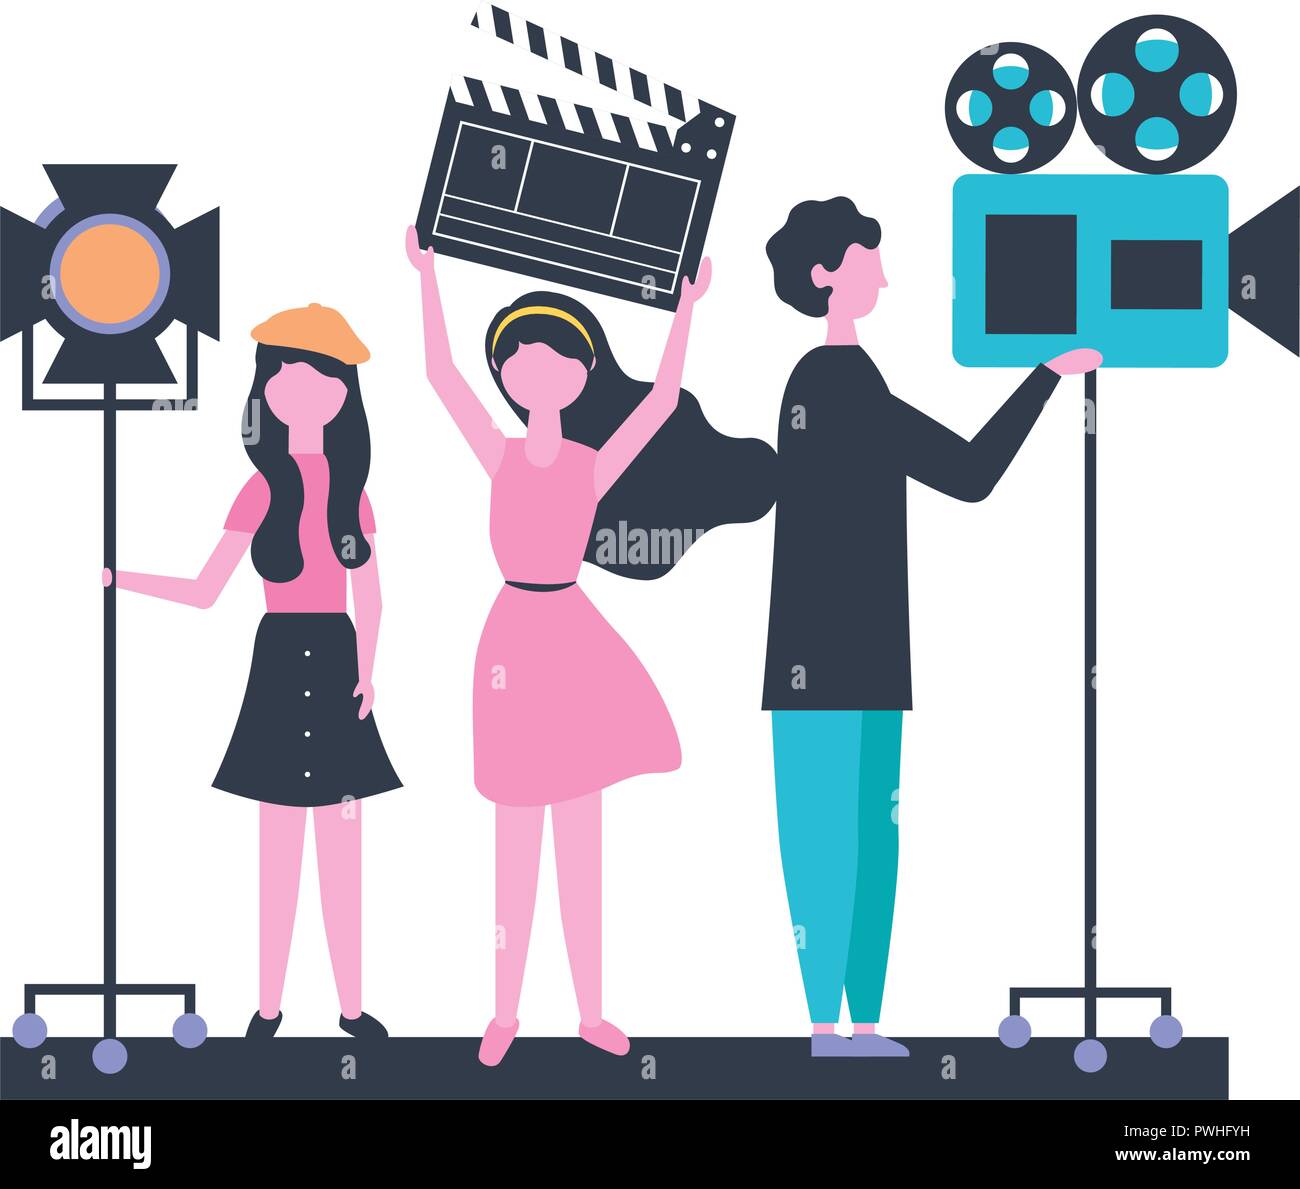 movie filming clipart